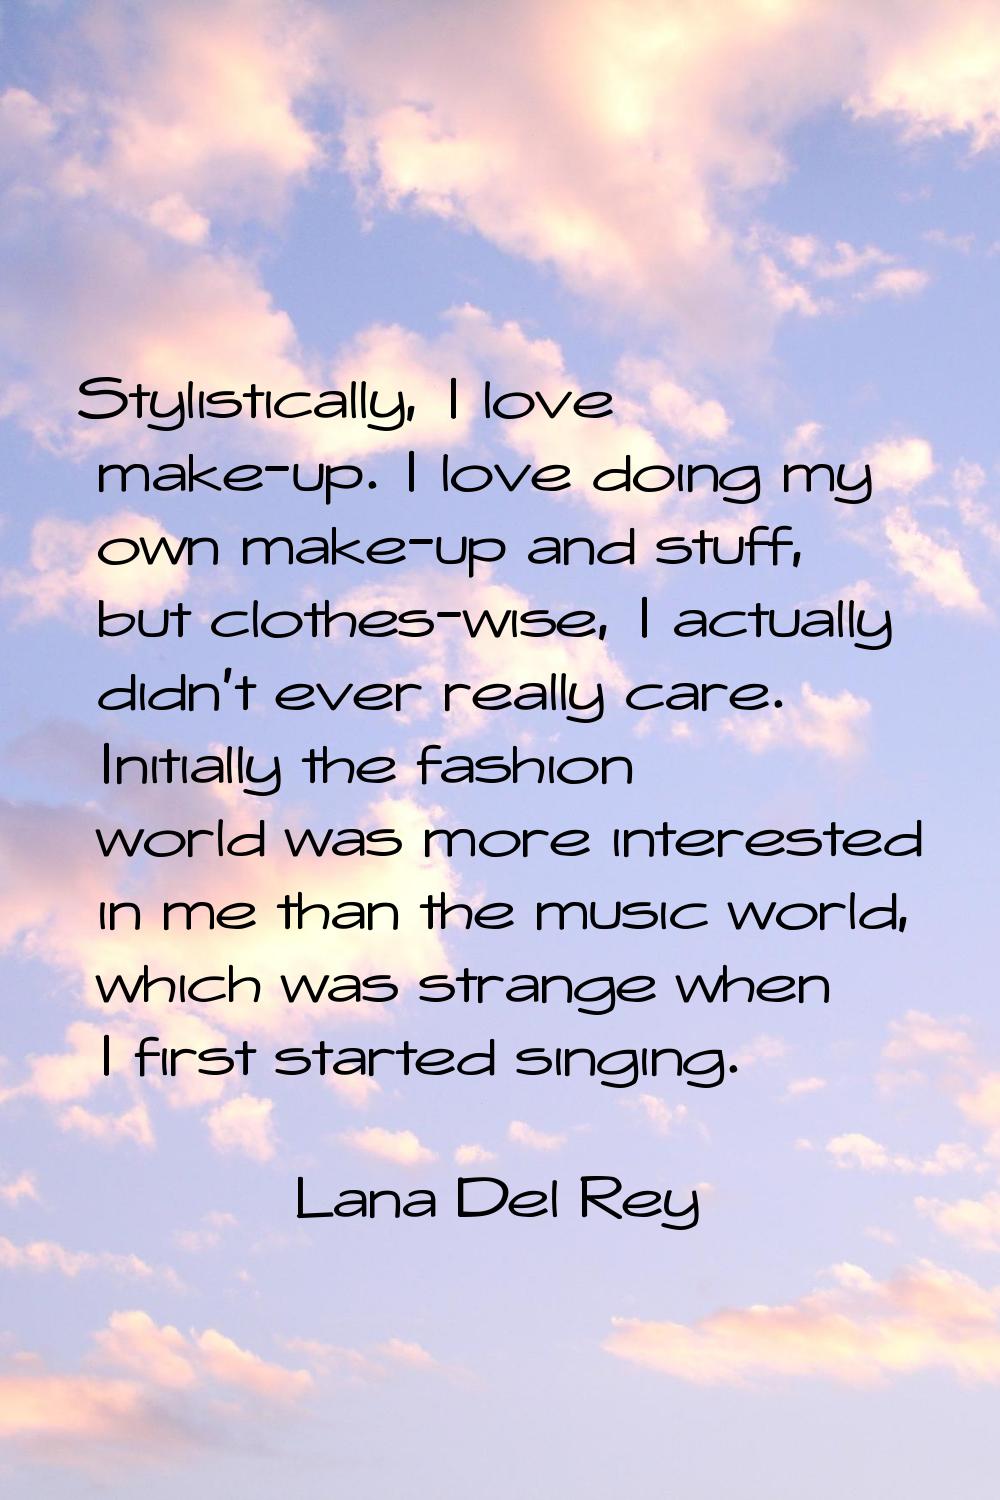 Stylistically, I love make-up. I love doing my own make-up and stuff, but clothes-wise, I actually 